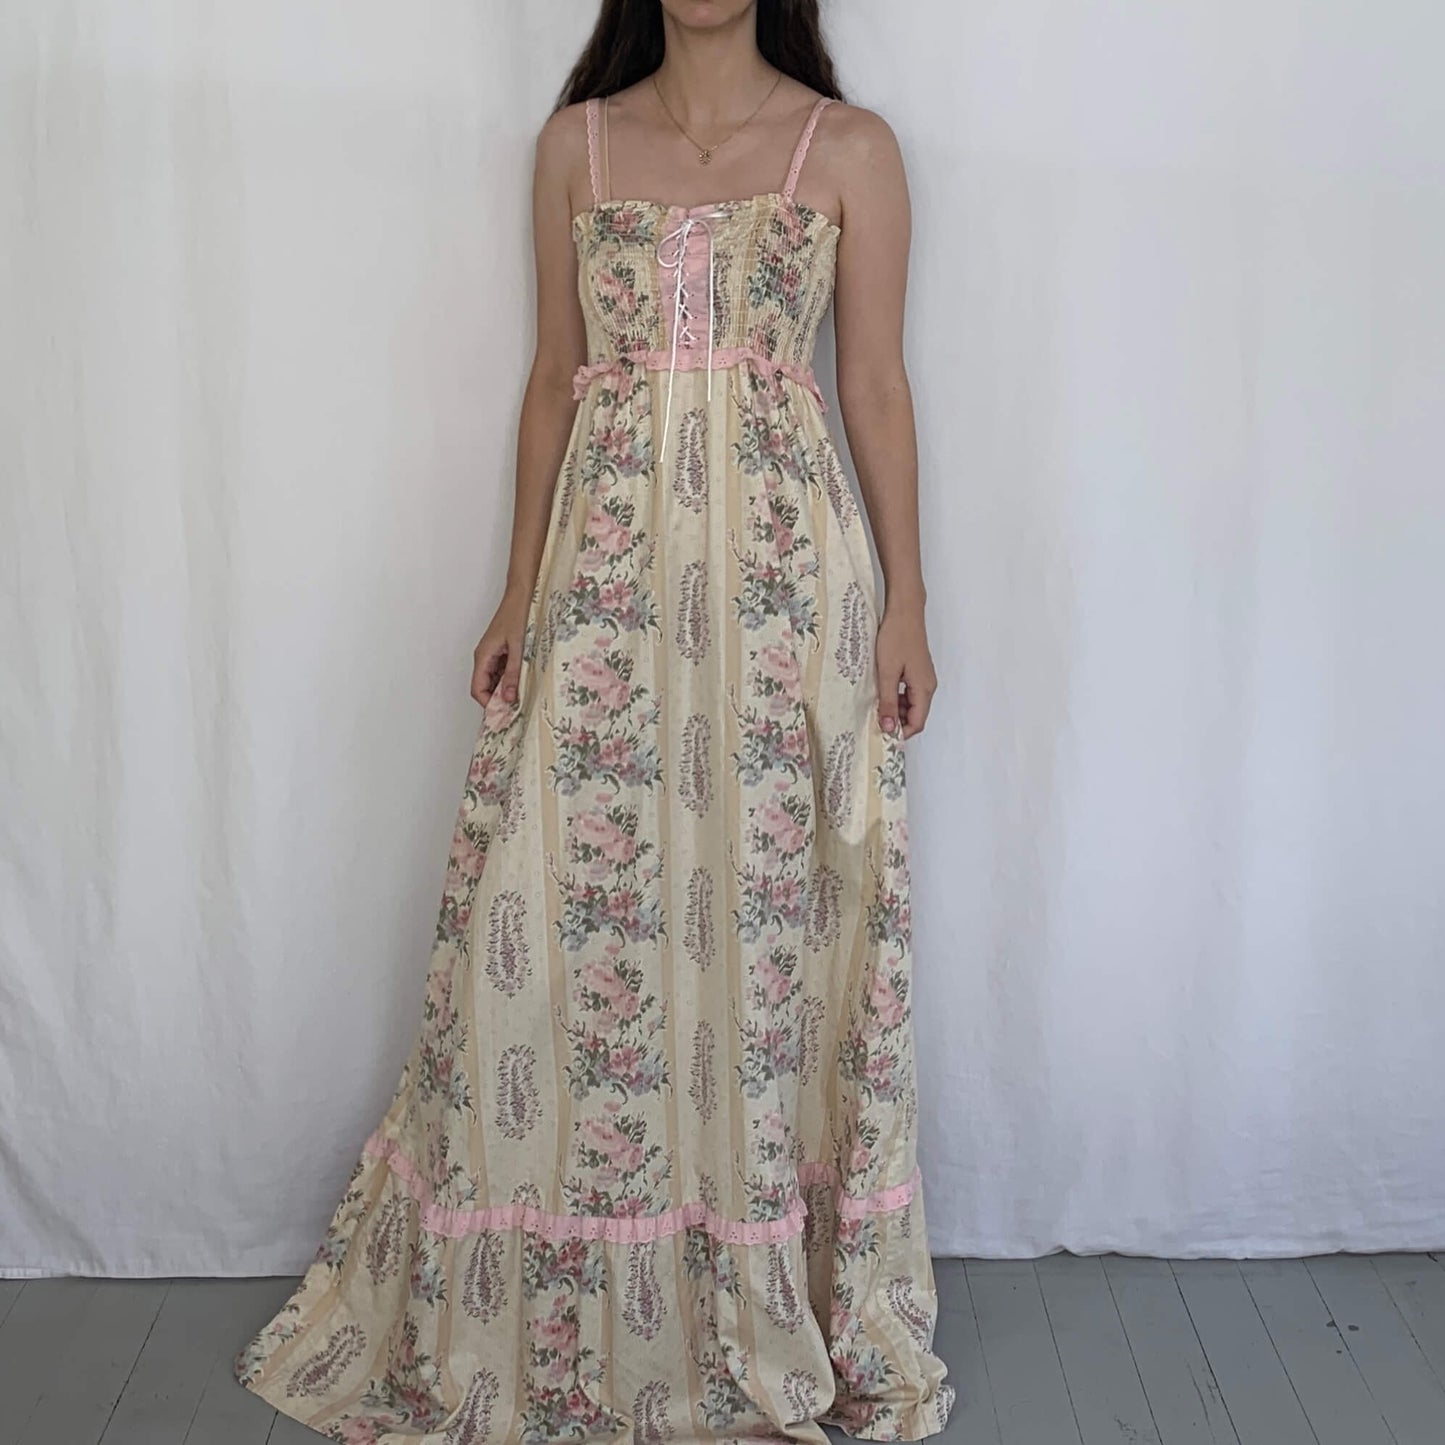 floral 70s maxi dress on a model in front of a white background